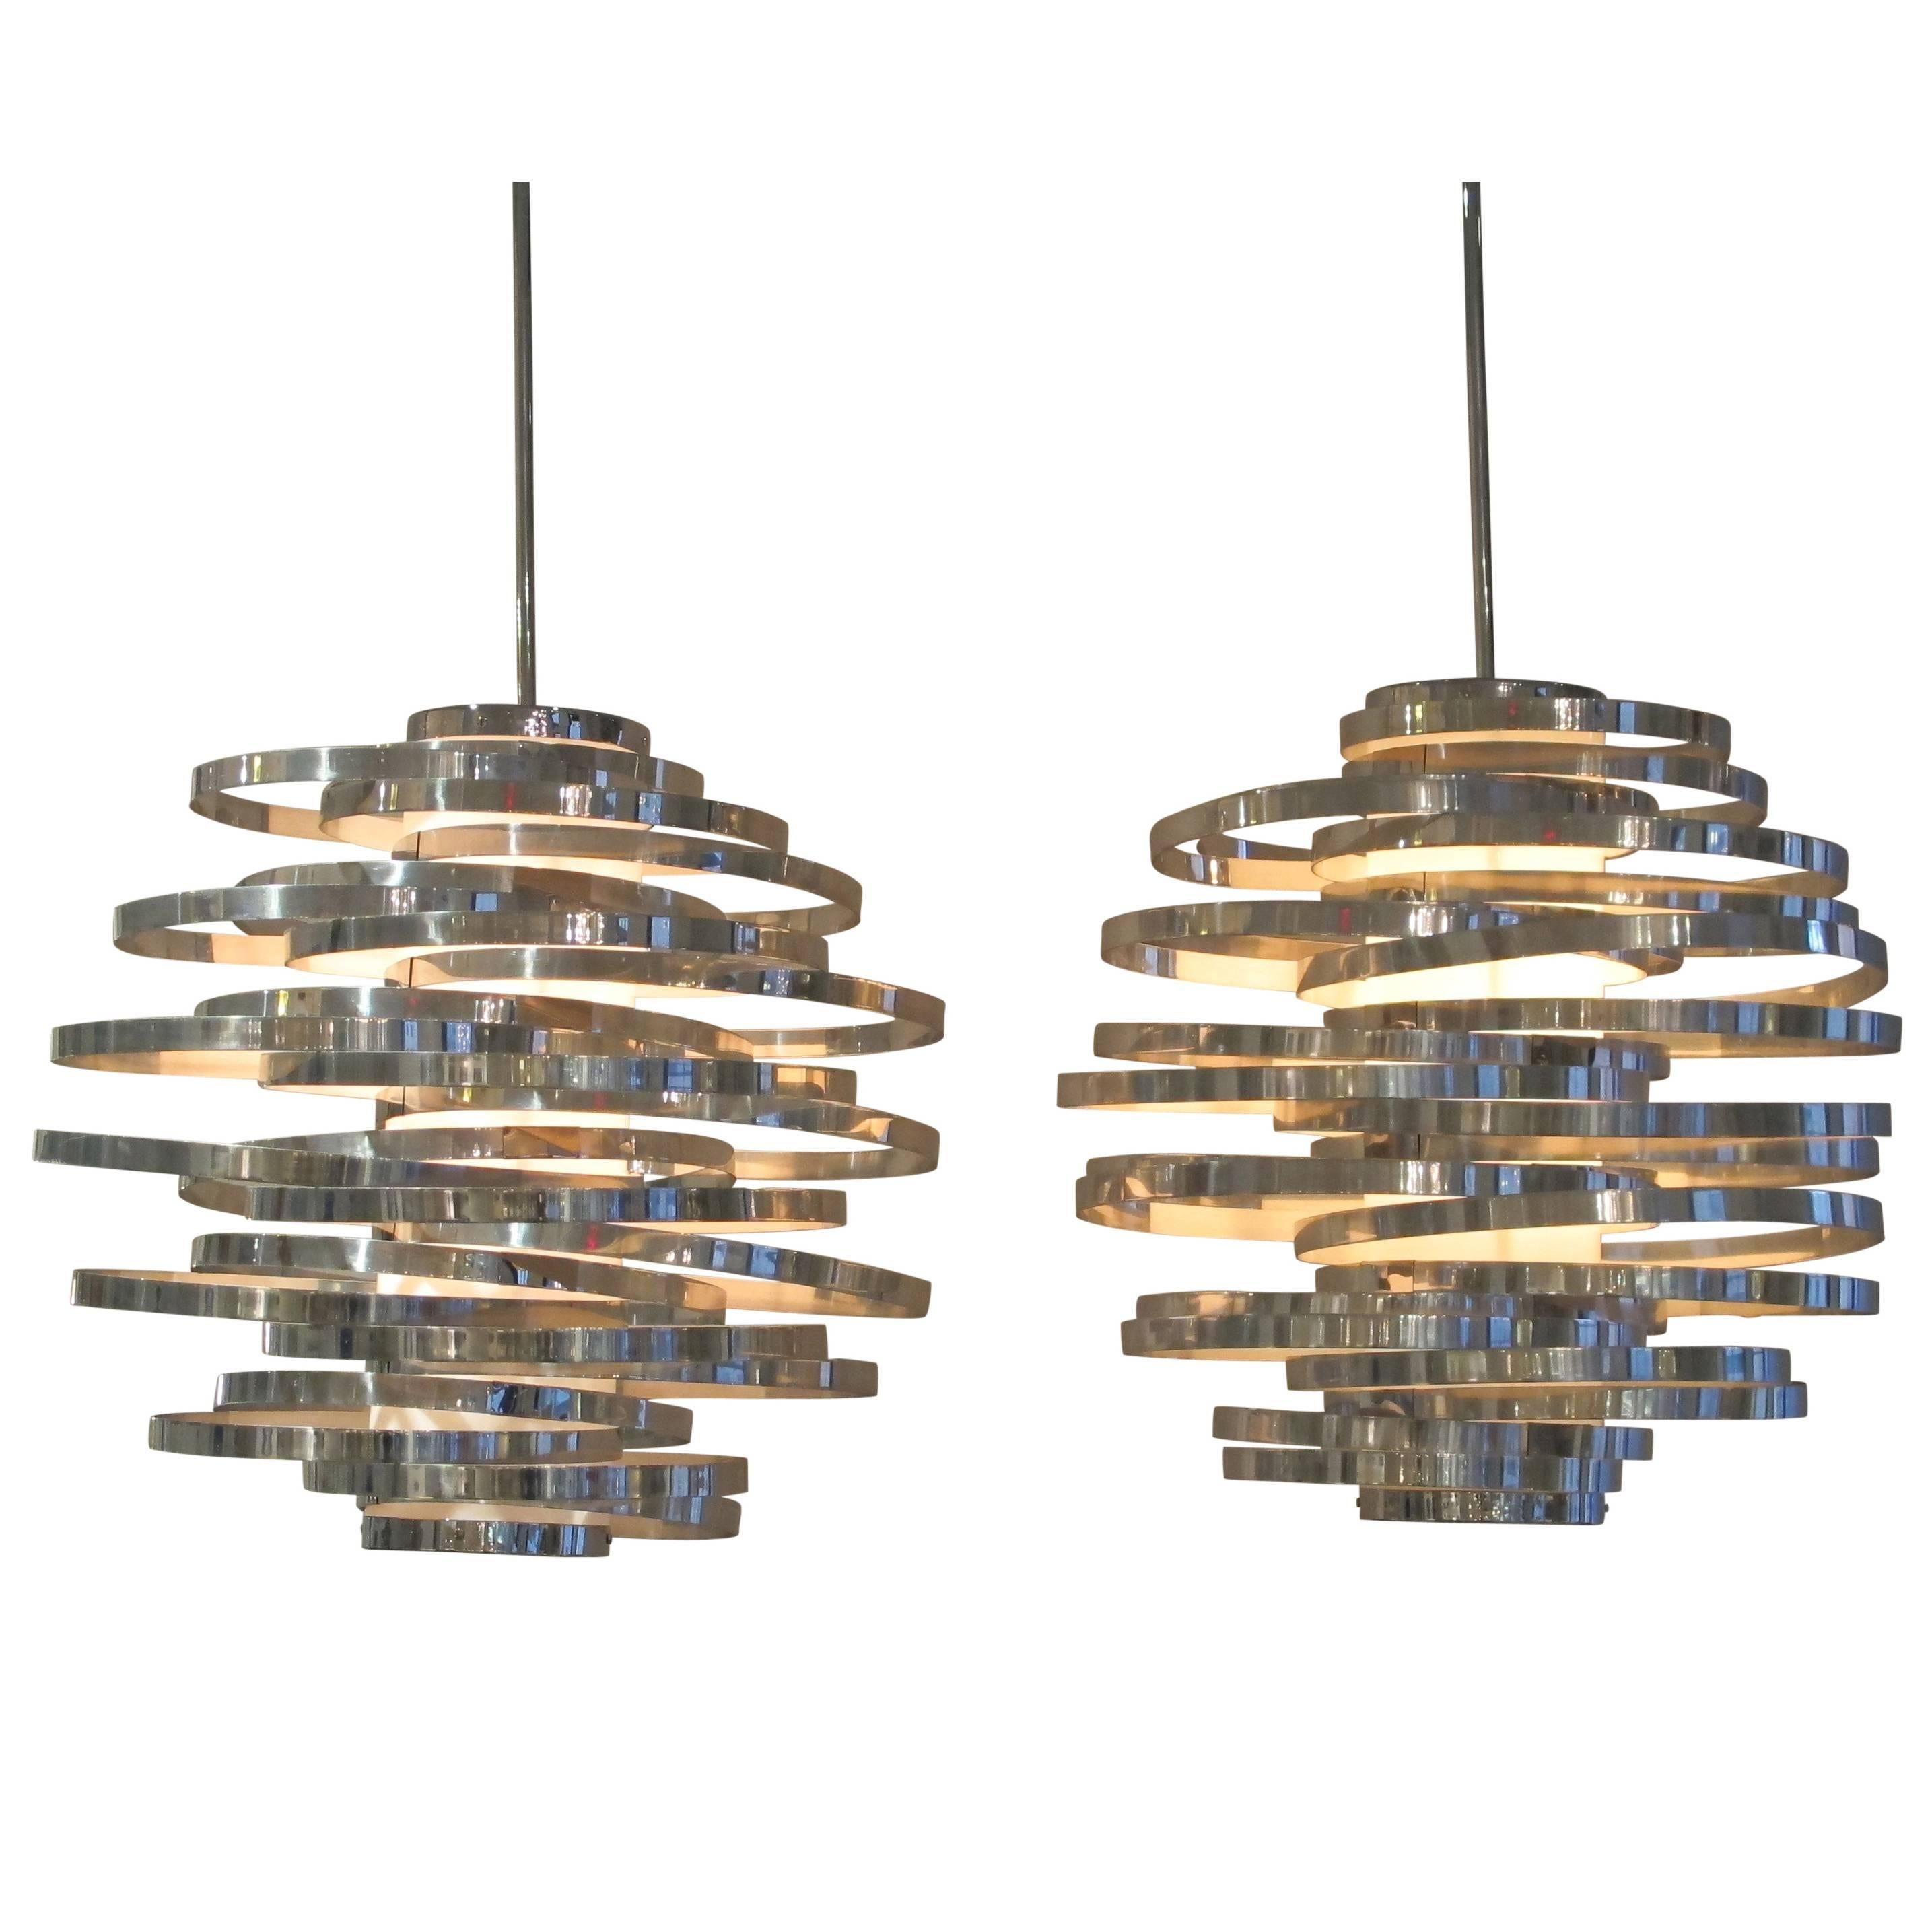 Pair of chromed aluminum cyclone chandeliers, Italy, 1970s. Constructed of polished aluminum bands and a plastic cylinder diffuser. Both fitted with custom three foot round stock rods and round chromed canopies. Rewired for immediate use.